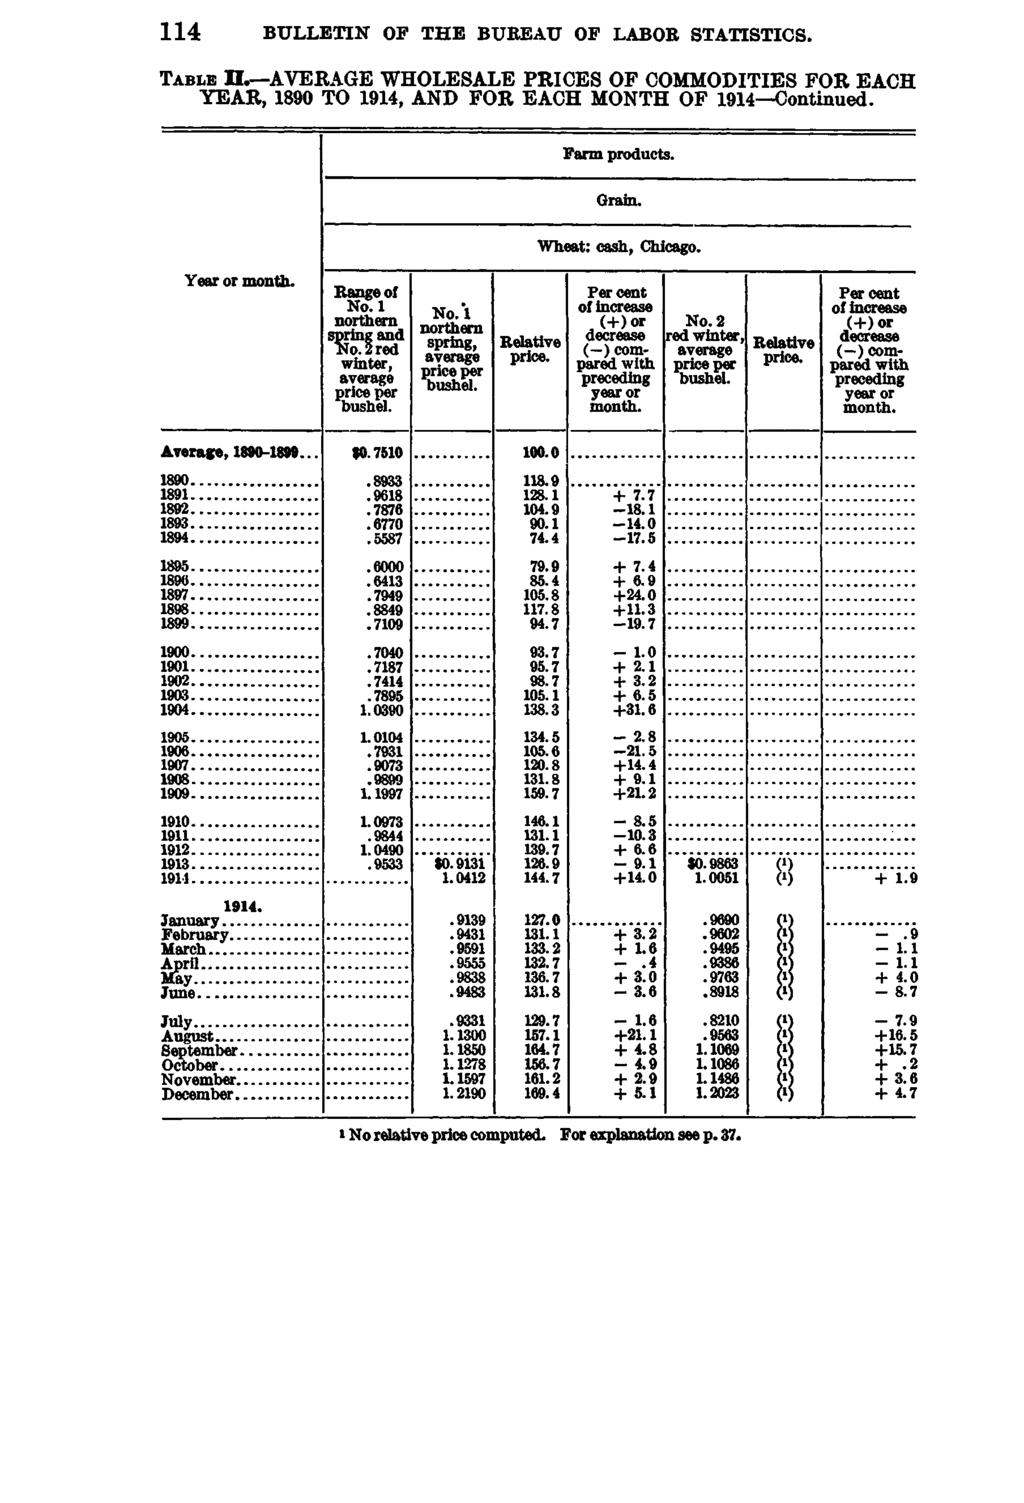 114 BULLETIN OP THE BUREAU OP LABOR STATISTICS. T a b le I L AVERAGE WHOLESALE PRICES OF COMMODITIES FOR EACH YEAR, 1890 TO 1914, AND FOR EACH MONTH OF 1914 Continued. Farm products. Grain.